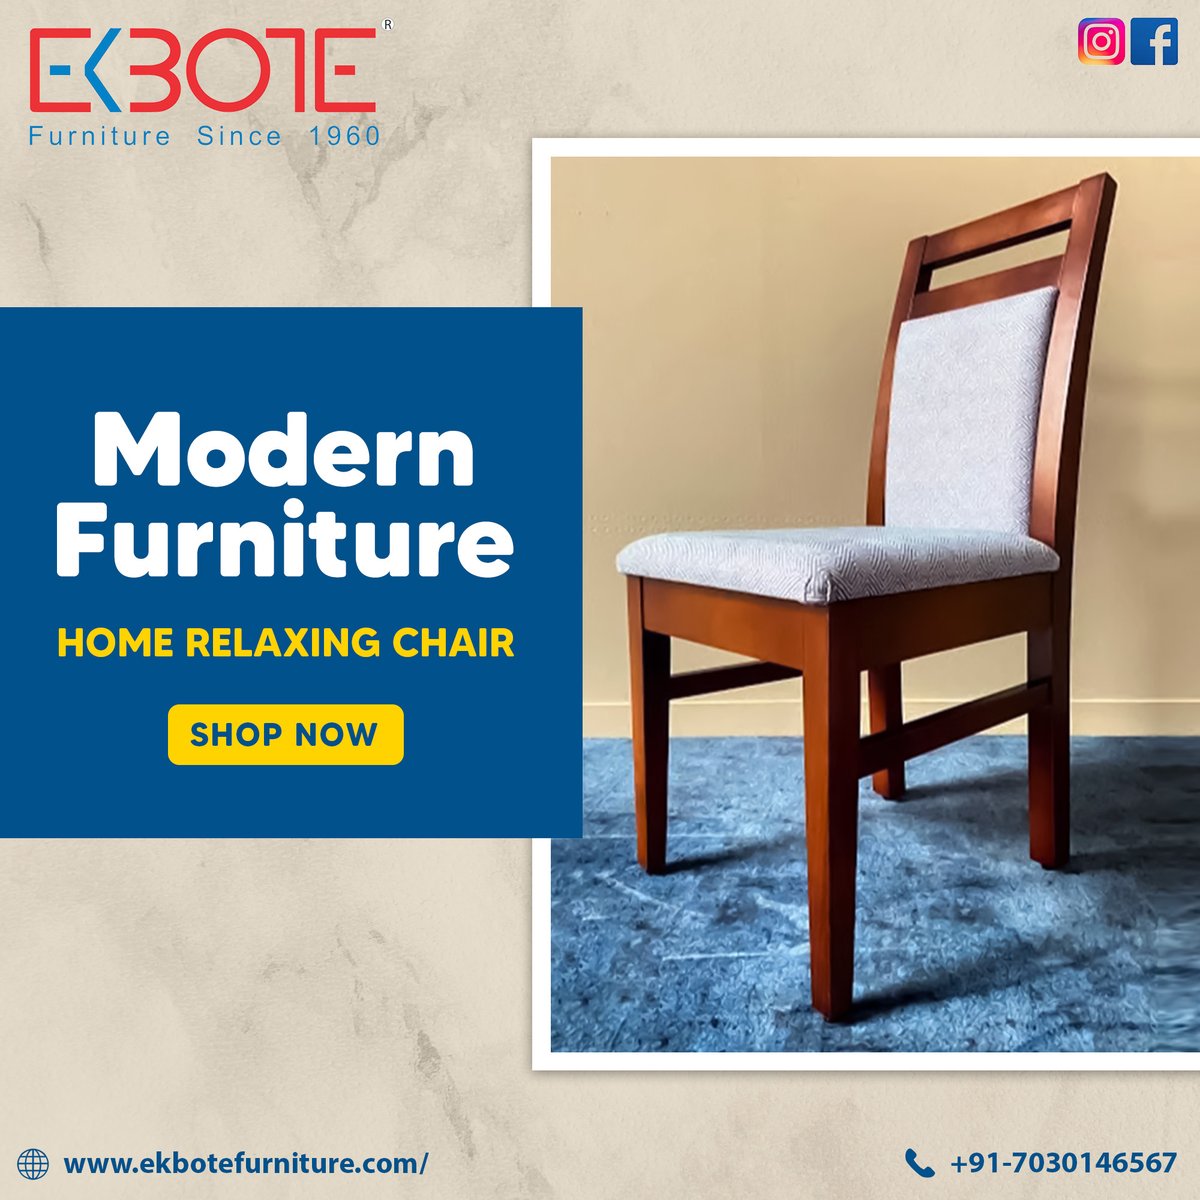 Strong, sturdy and comfortable.

Check our dining chair collection here, ekbotefurniture.com/collections/di…

#ekbotefurniture #woodenchair #diningchairs #woodendiningchair